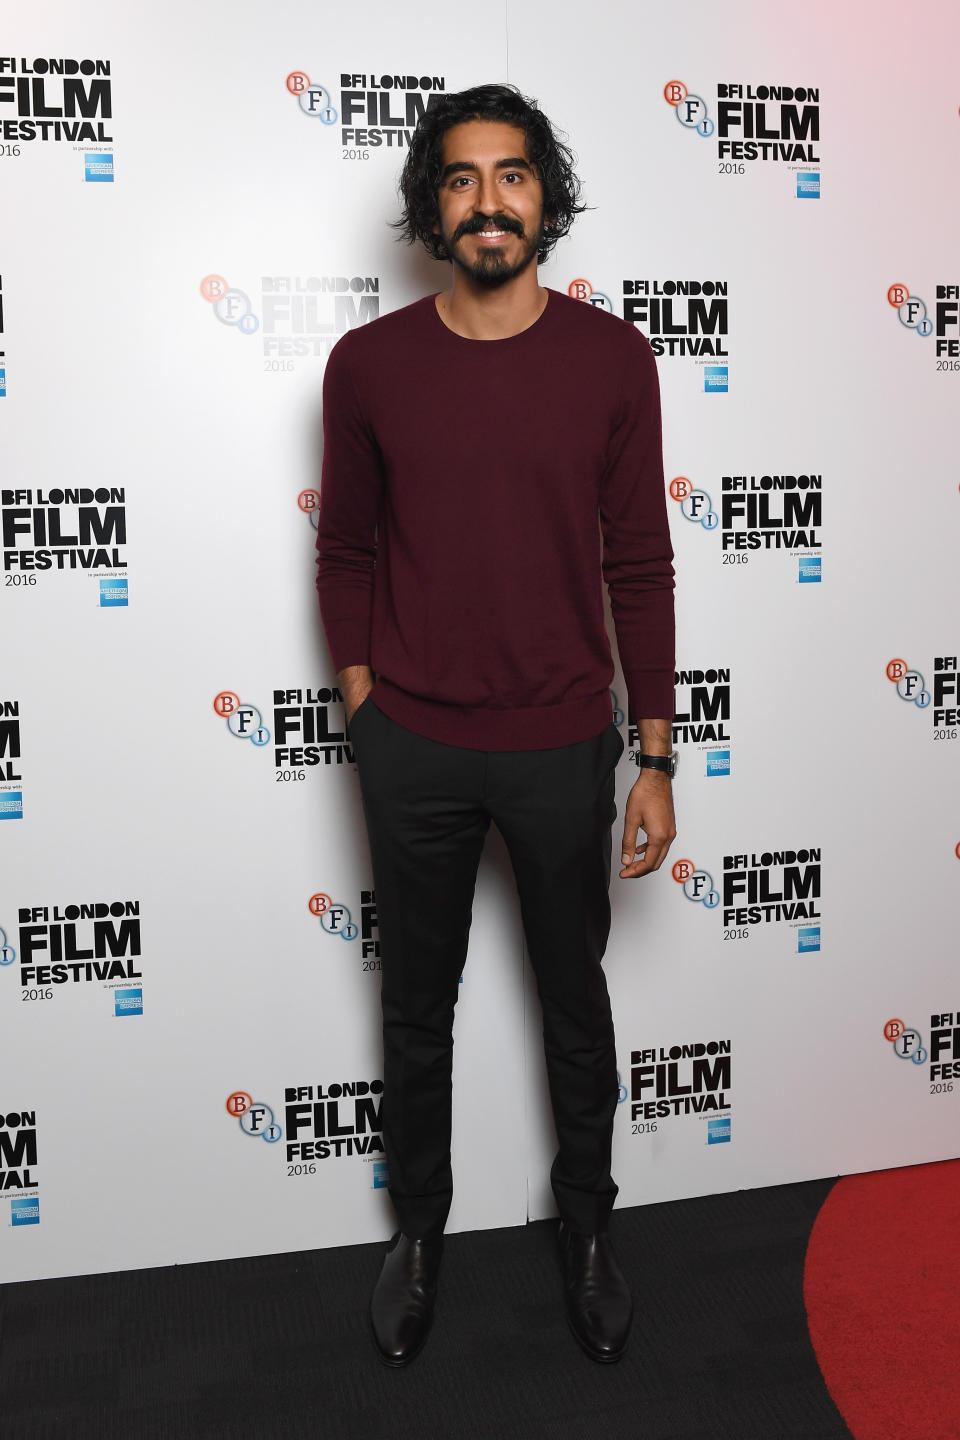 Patel at the 60th BFI London Film Festival at Picturehouse Central in London on Oct. 12, 2016.